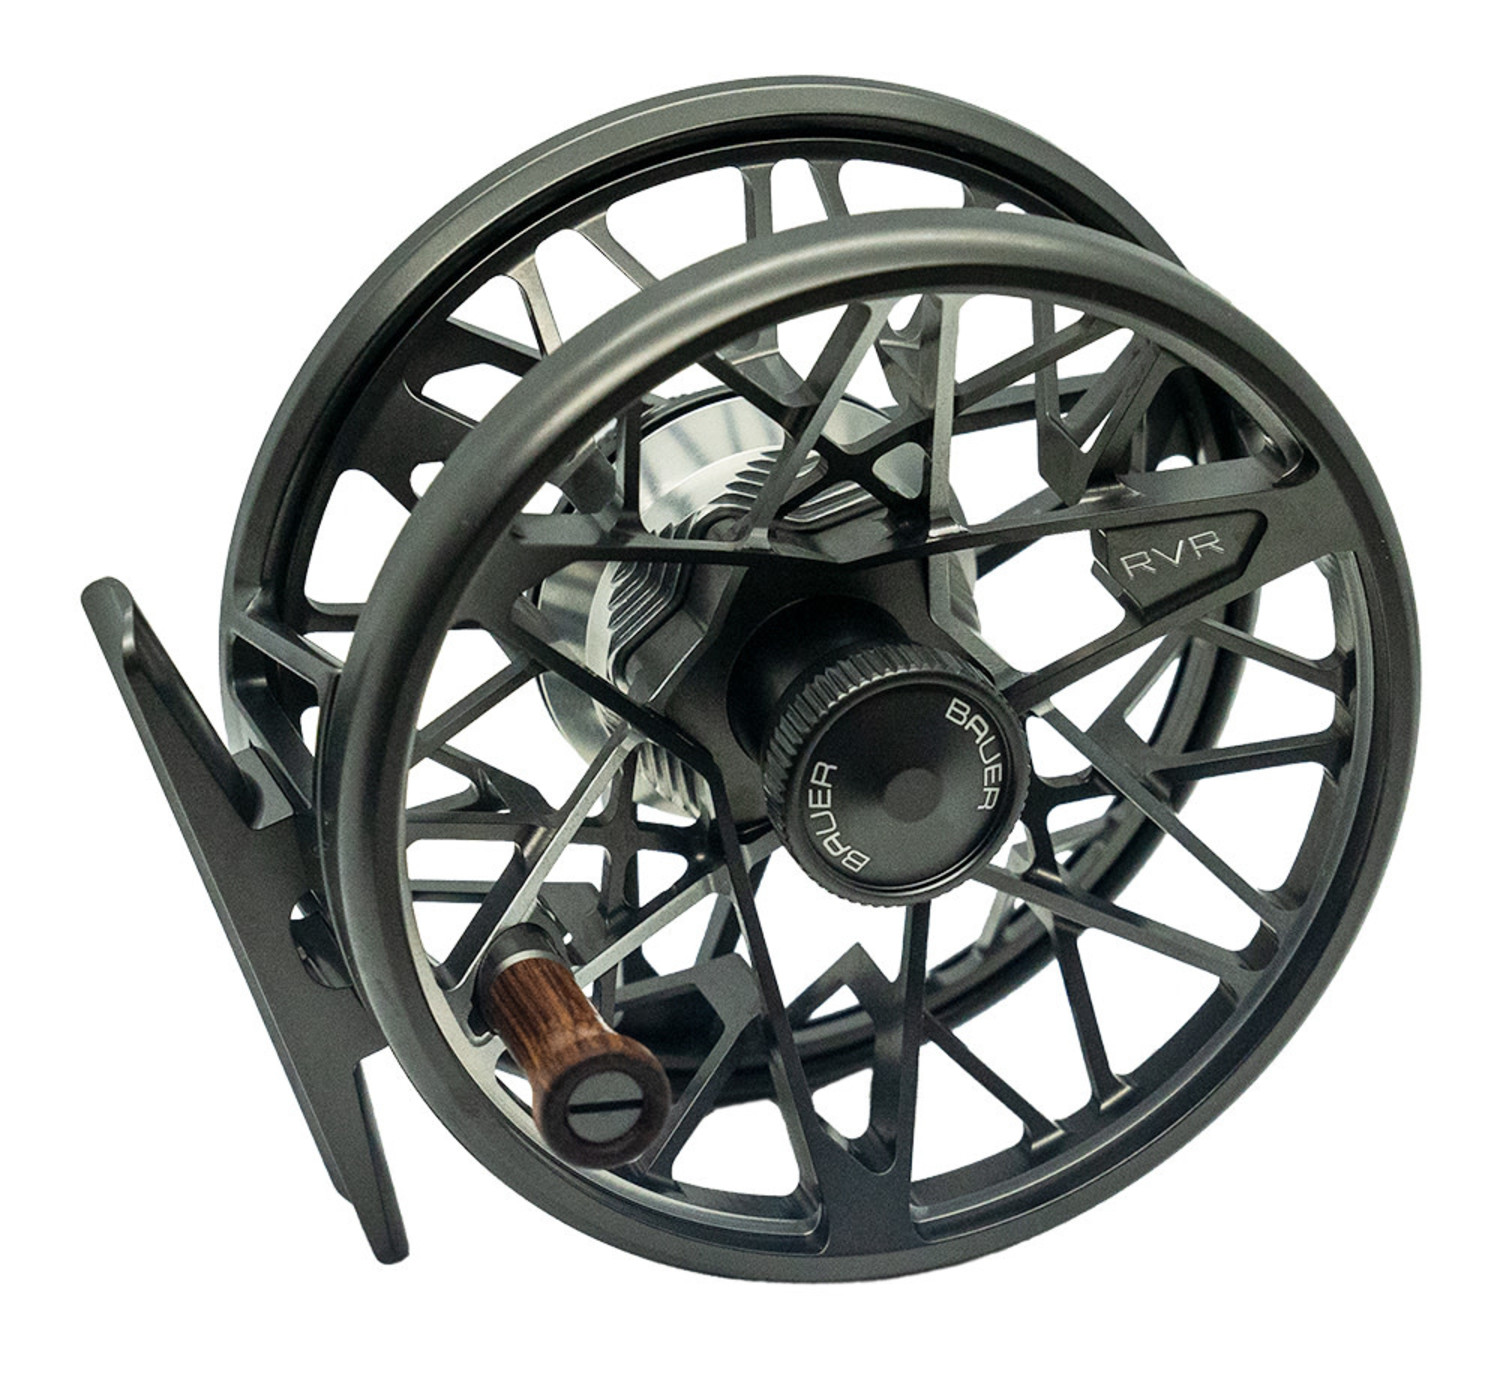 Bauer RVR Reel Charcoal/Silver - Royal Treatment Fly Fishing